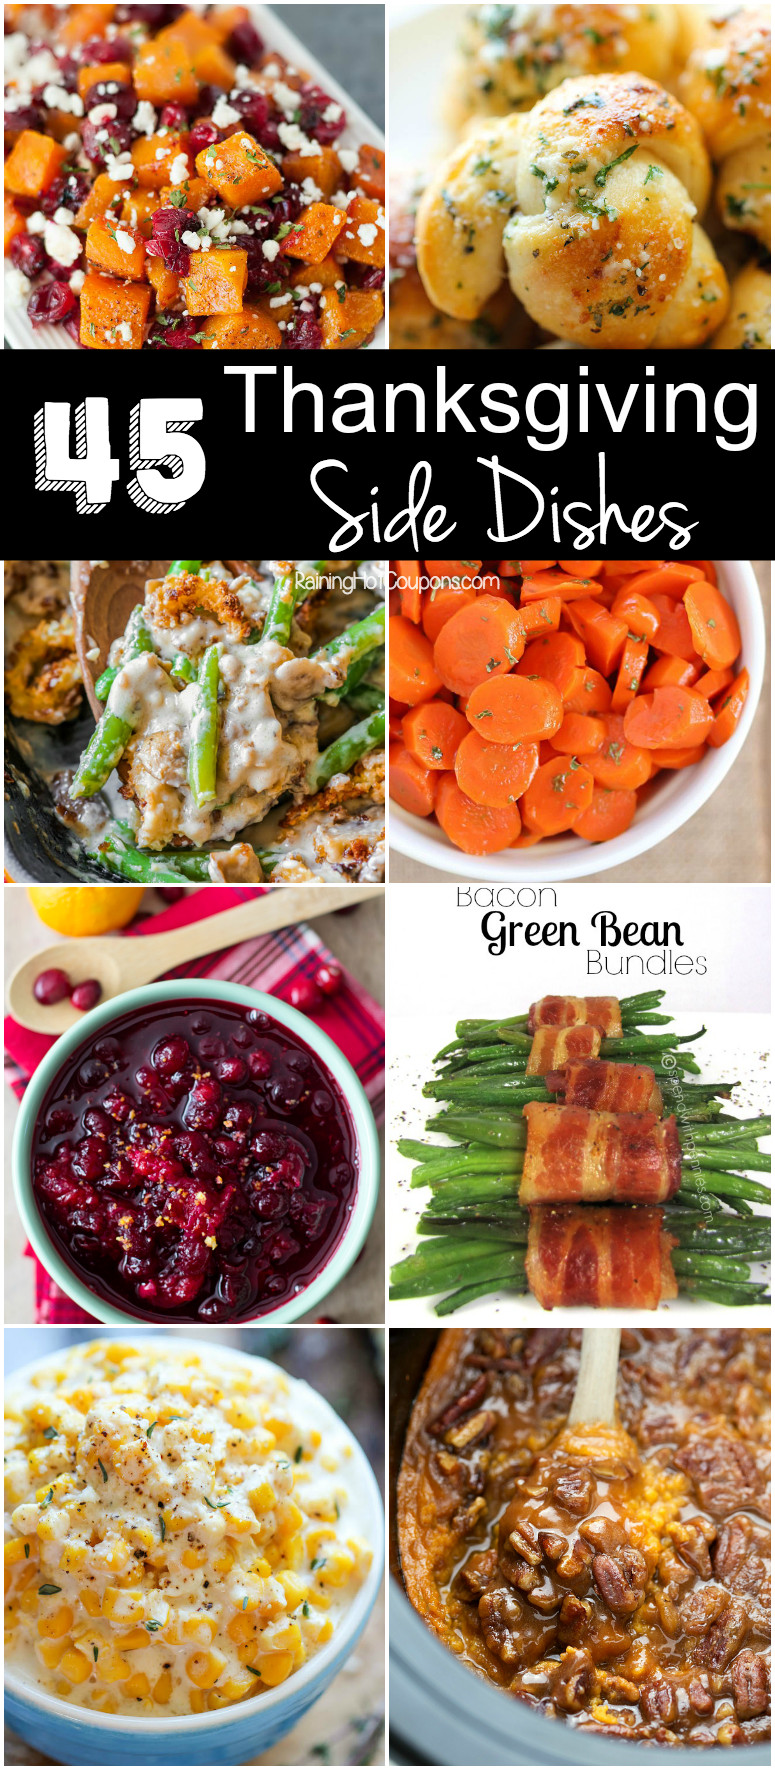 35 Ideas for Turkey Dinner Sides Best Recipes Ideas and Collections